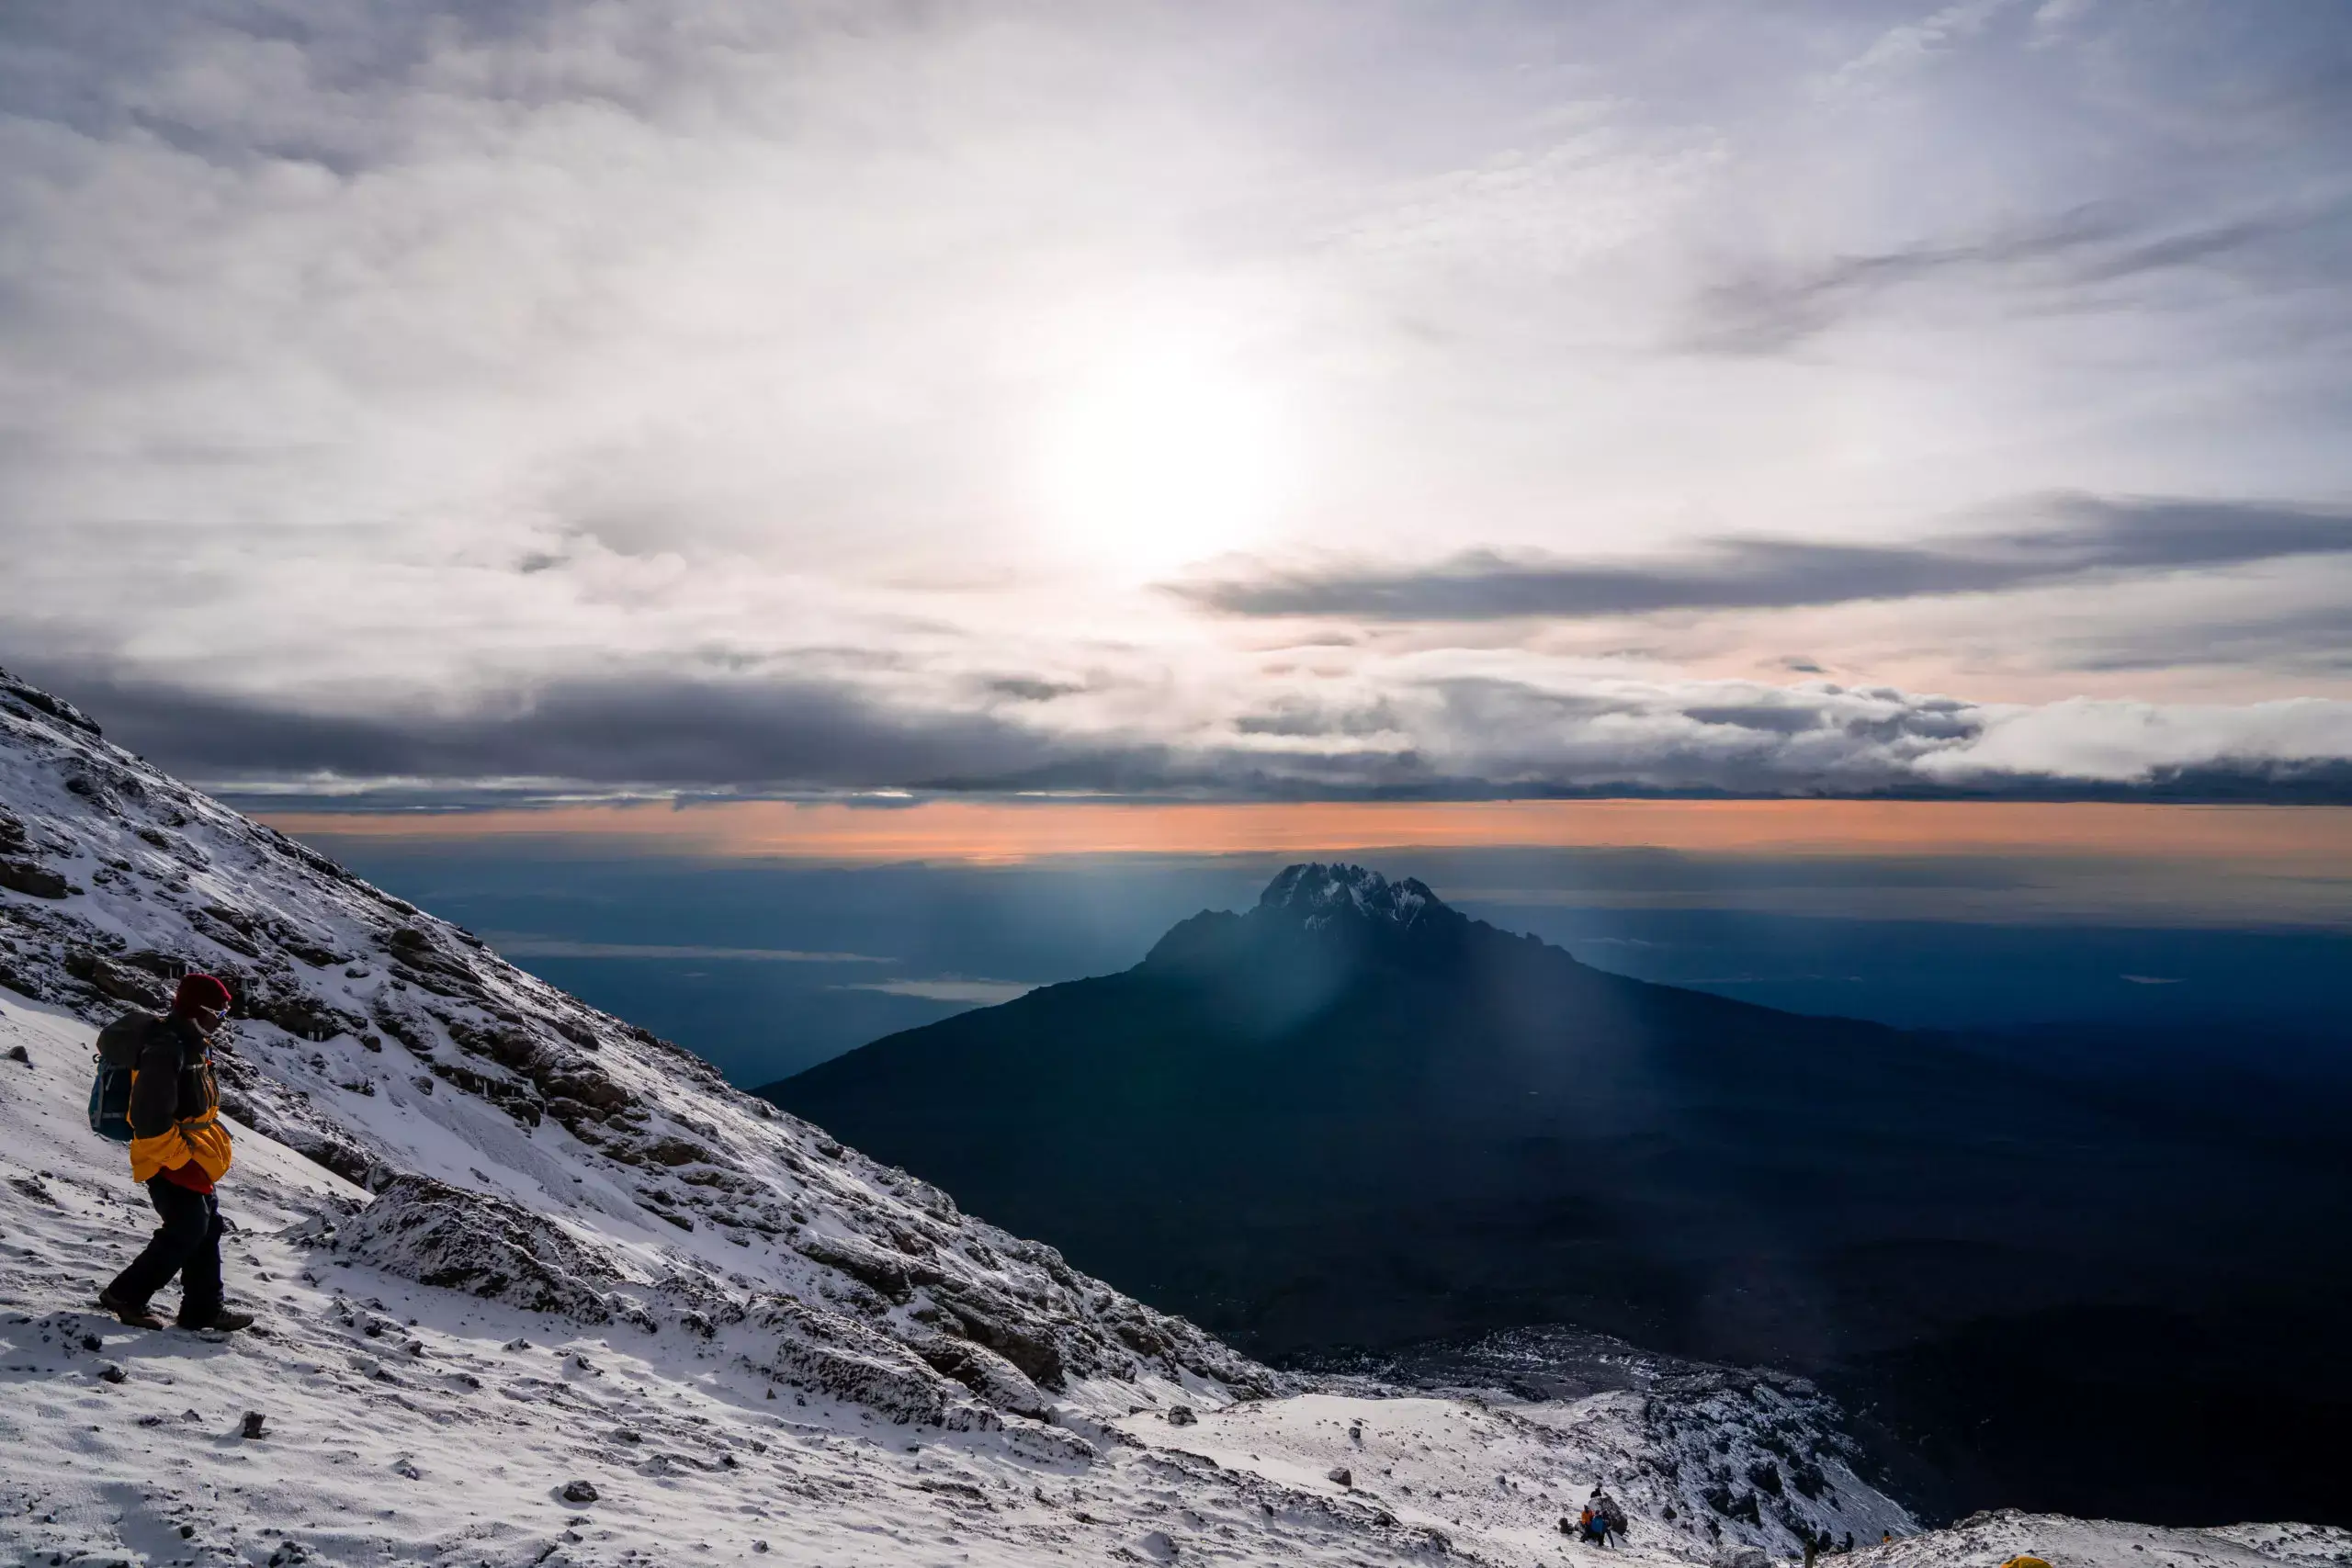 magnificent view of Kilimanjaro from peak